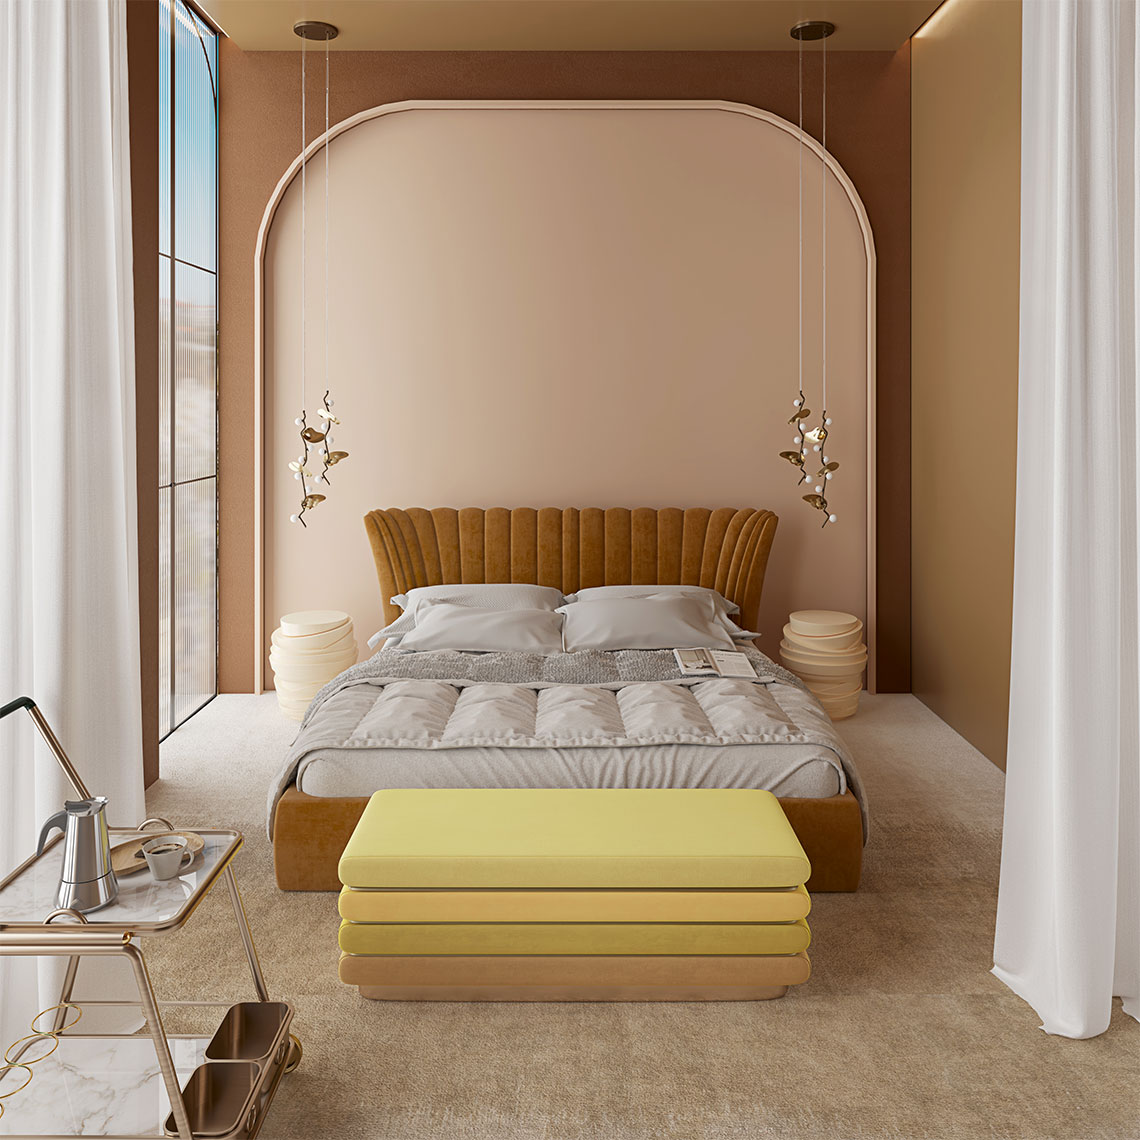 Upholstered Bed You'll Fall in Love With: Valerie